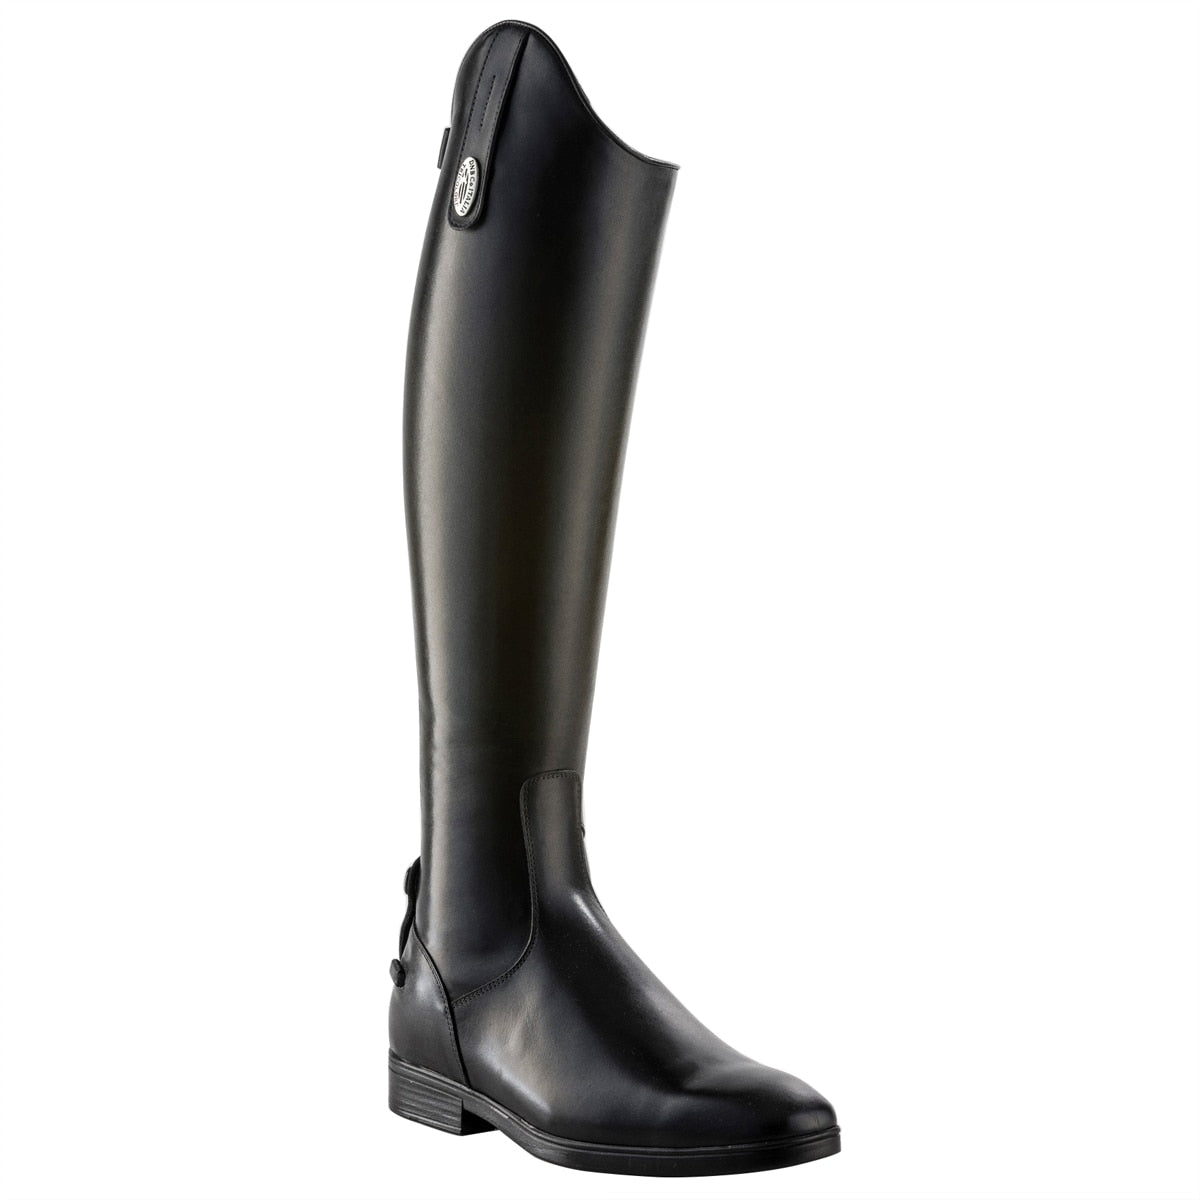 TriColore by DeNiro Amabile Dress Boot Smooth Leather, Corta (Short) Height